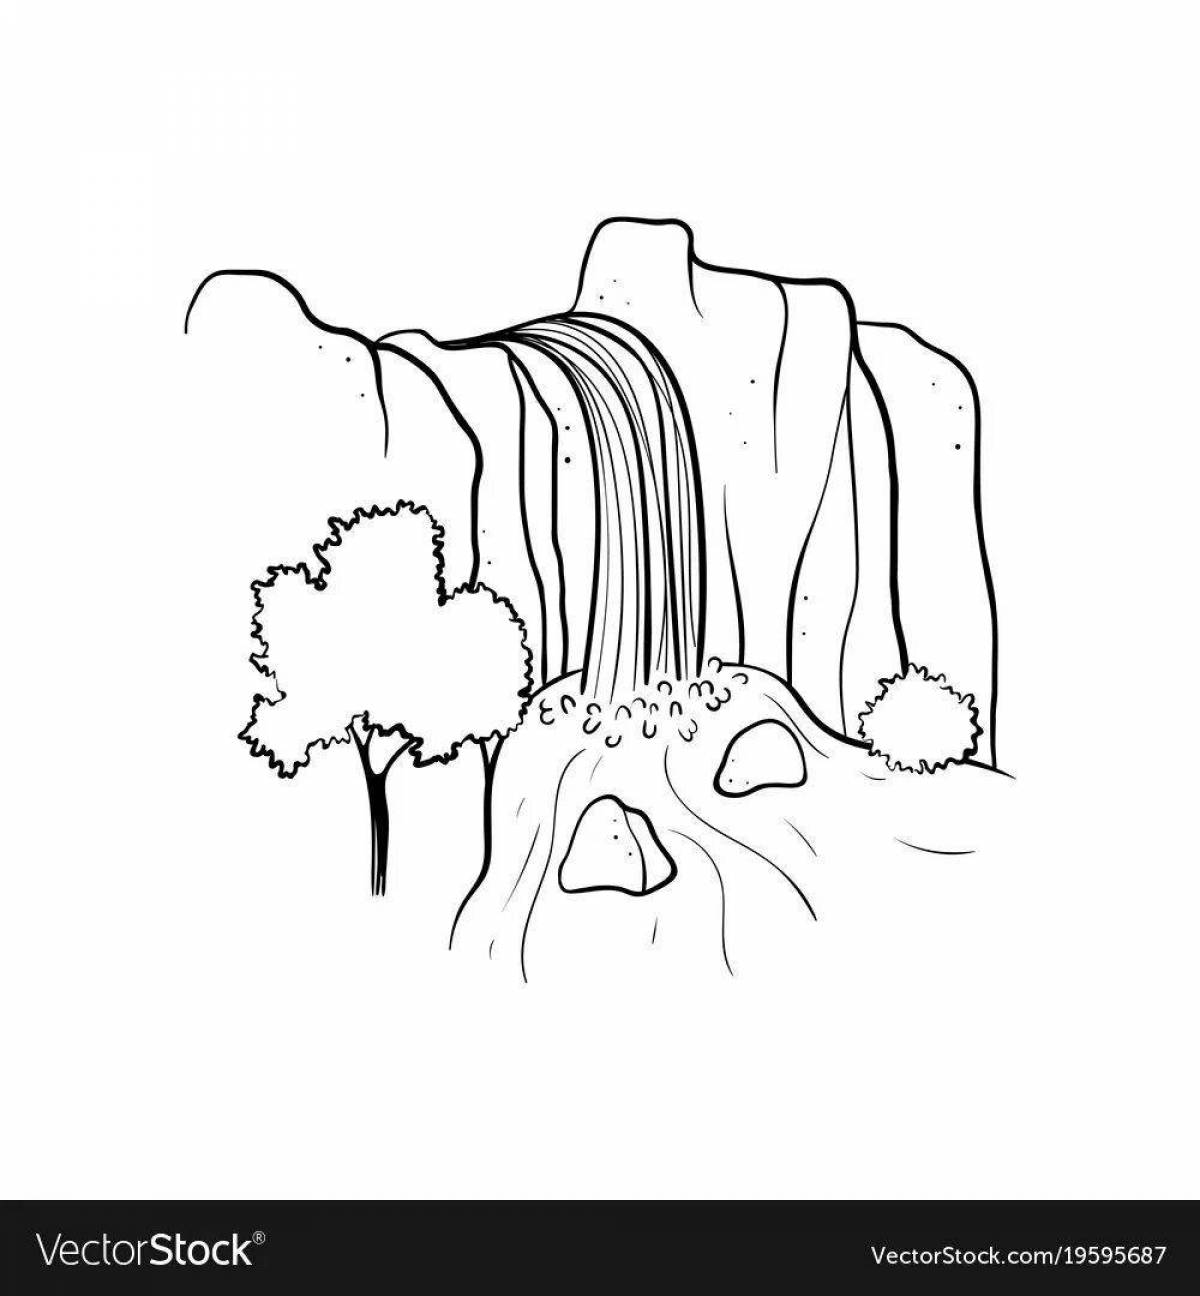 Live waterfall coloring book for kids